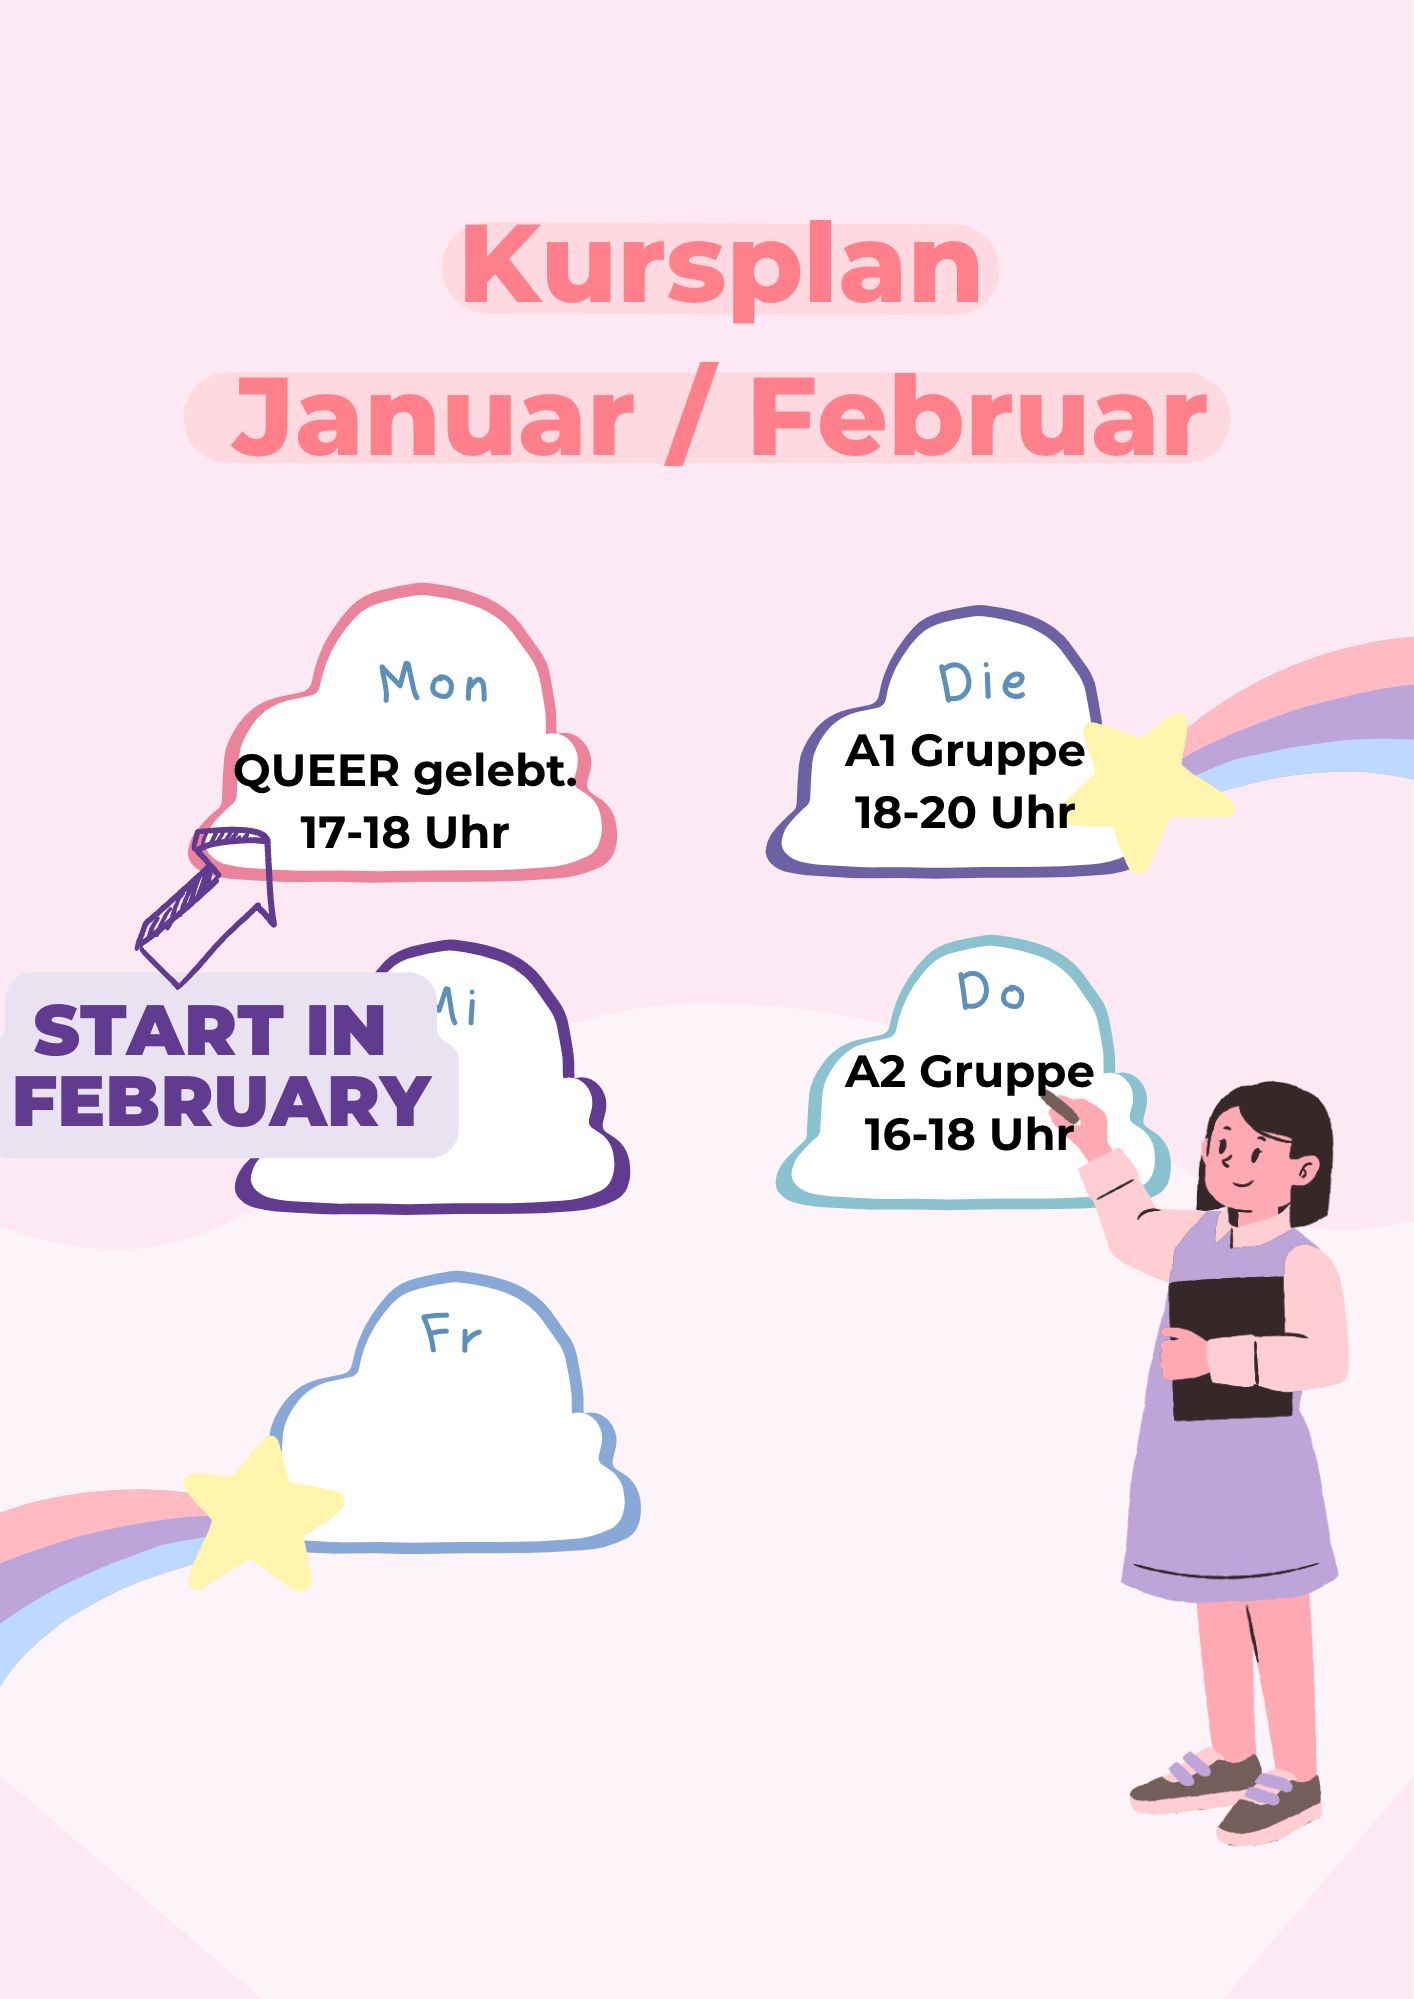 Course plan for January and February in soft colours. A person in a dress who looks like a teacher is pointing with a pencil to one of the clouds with the information. There are also shooting stars with colourful tails